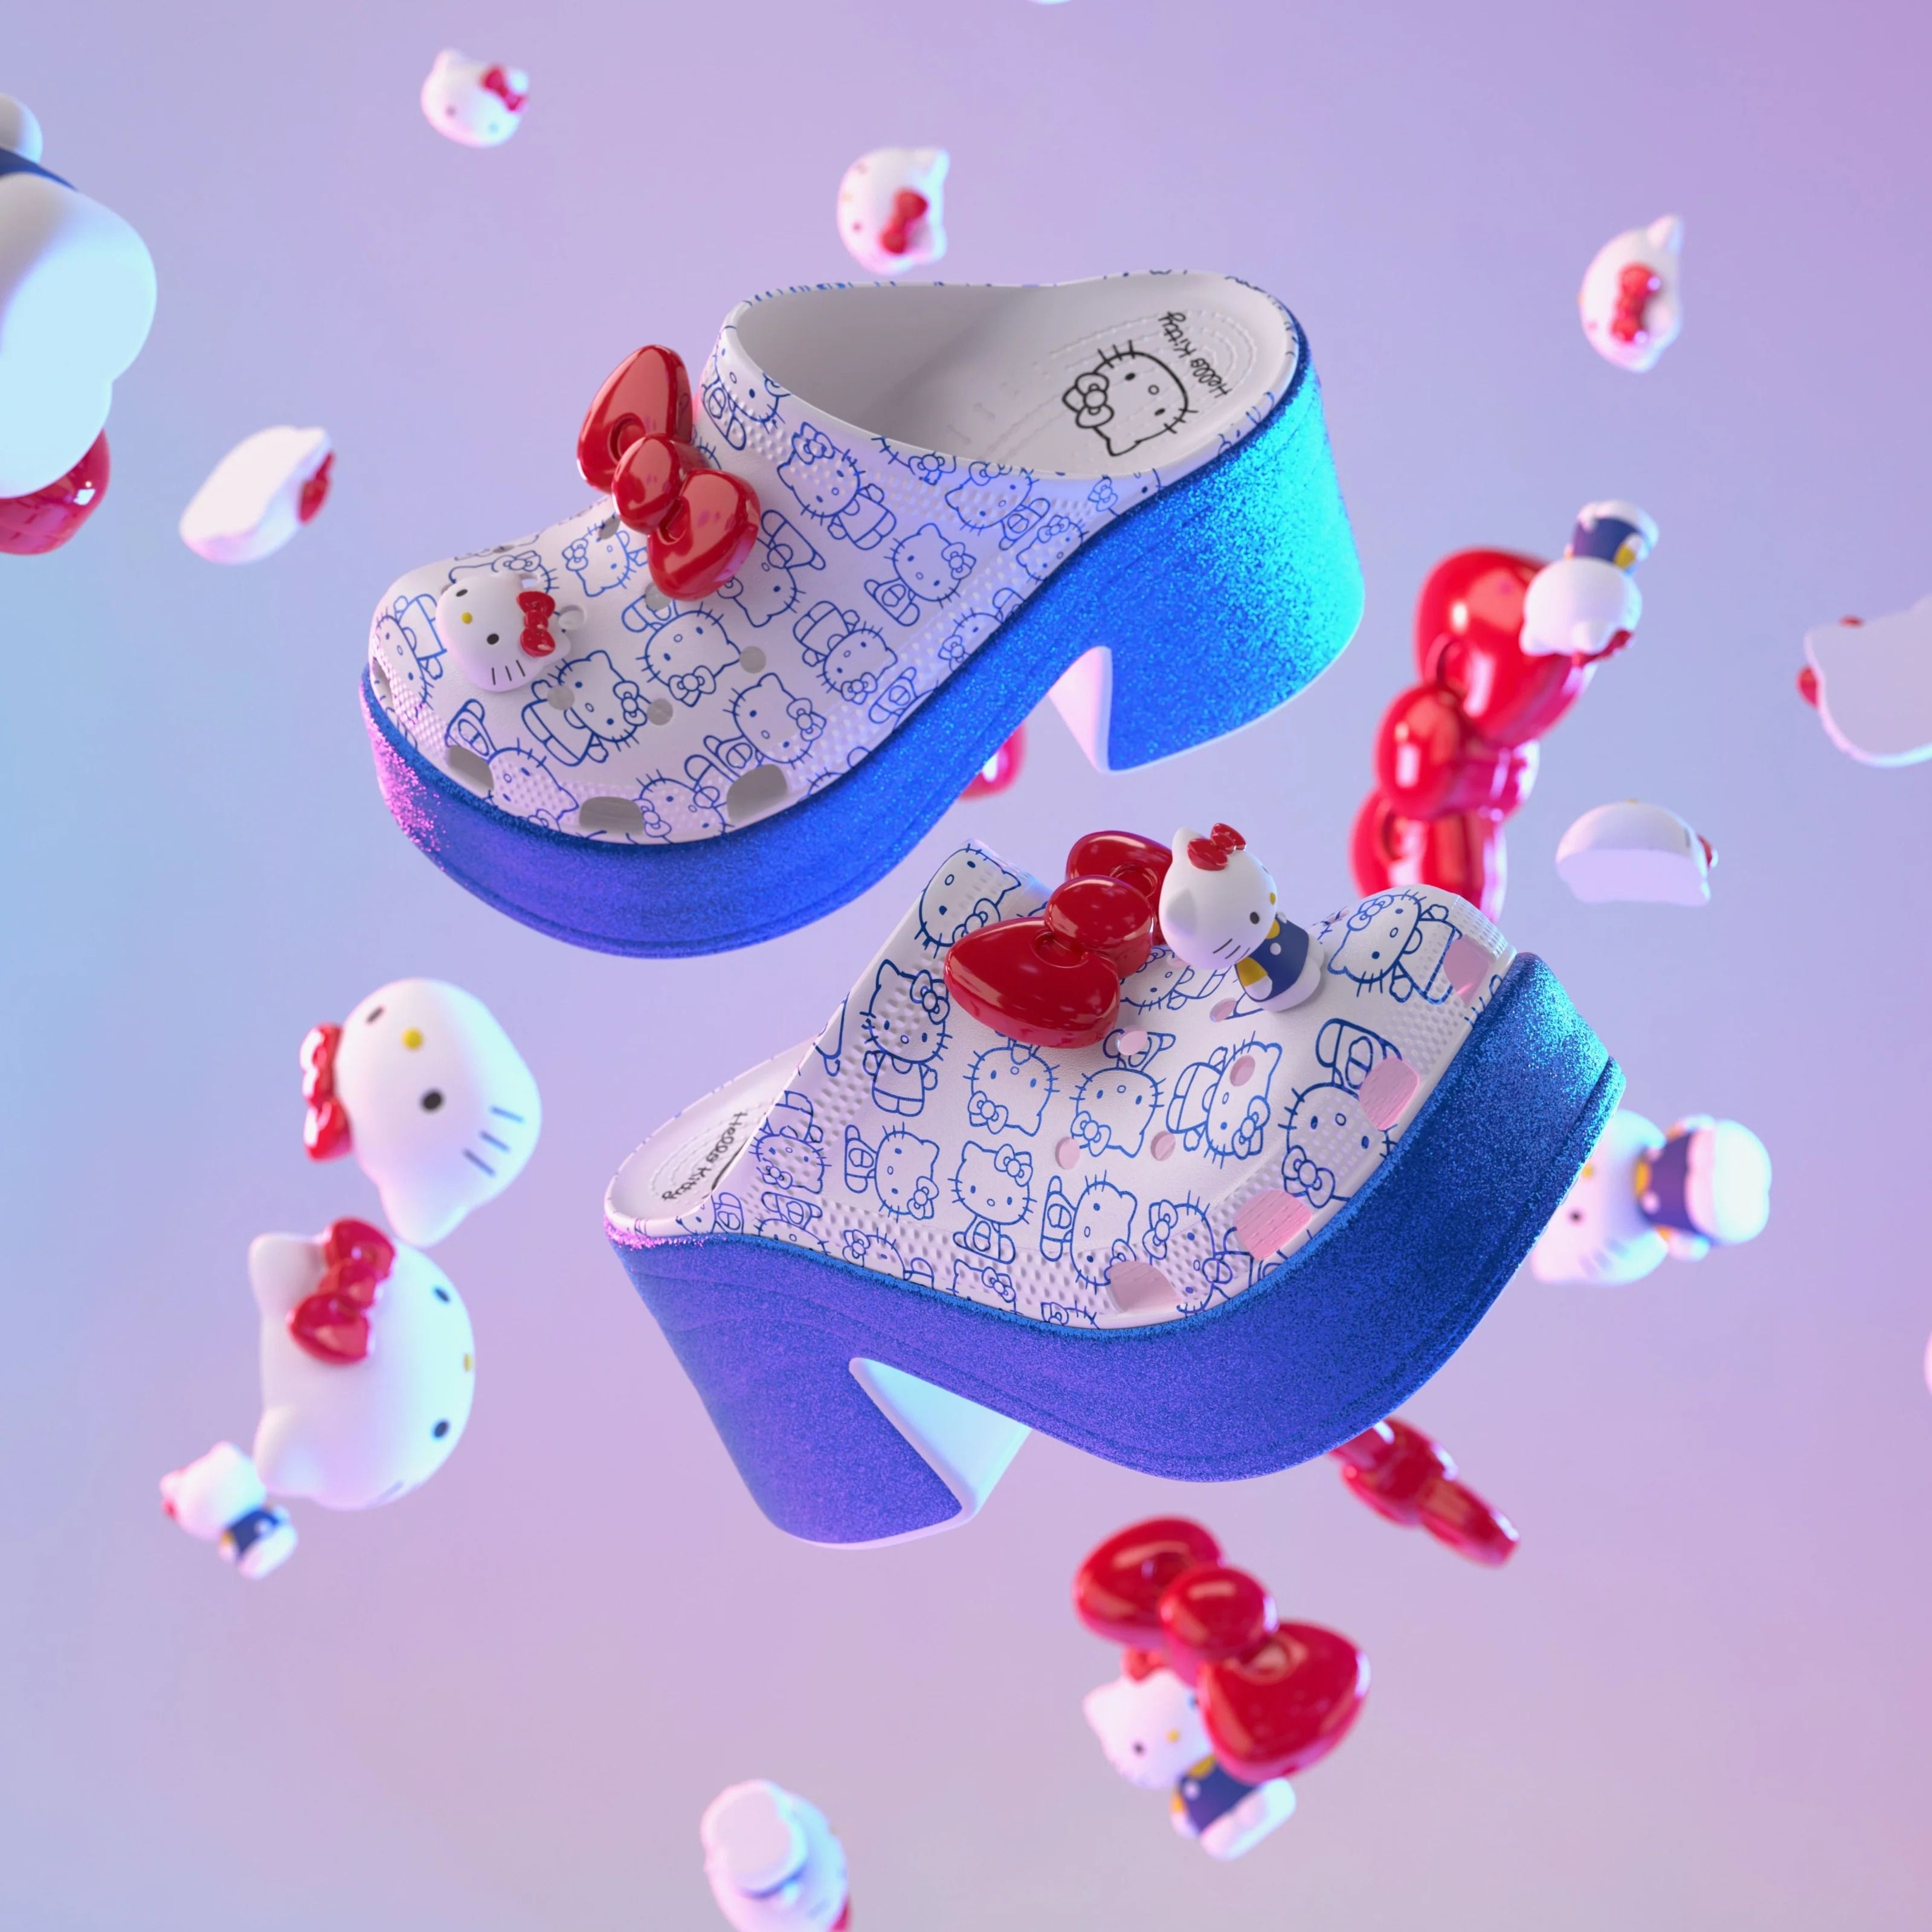 Sanrio's Hello Kitty Releases Special Anniversary Crocs for Kids and Adults